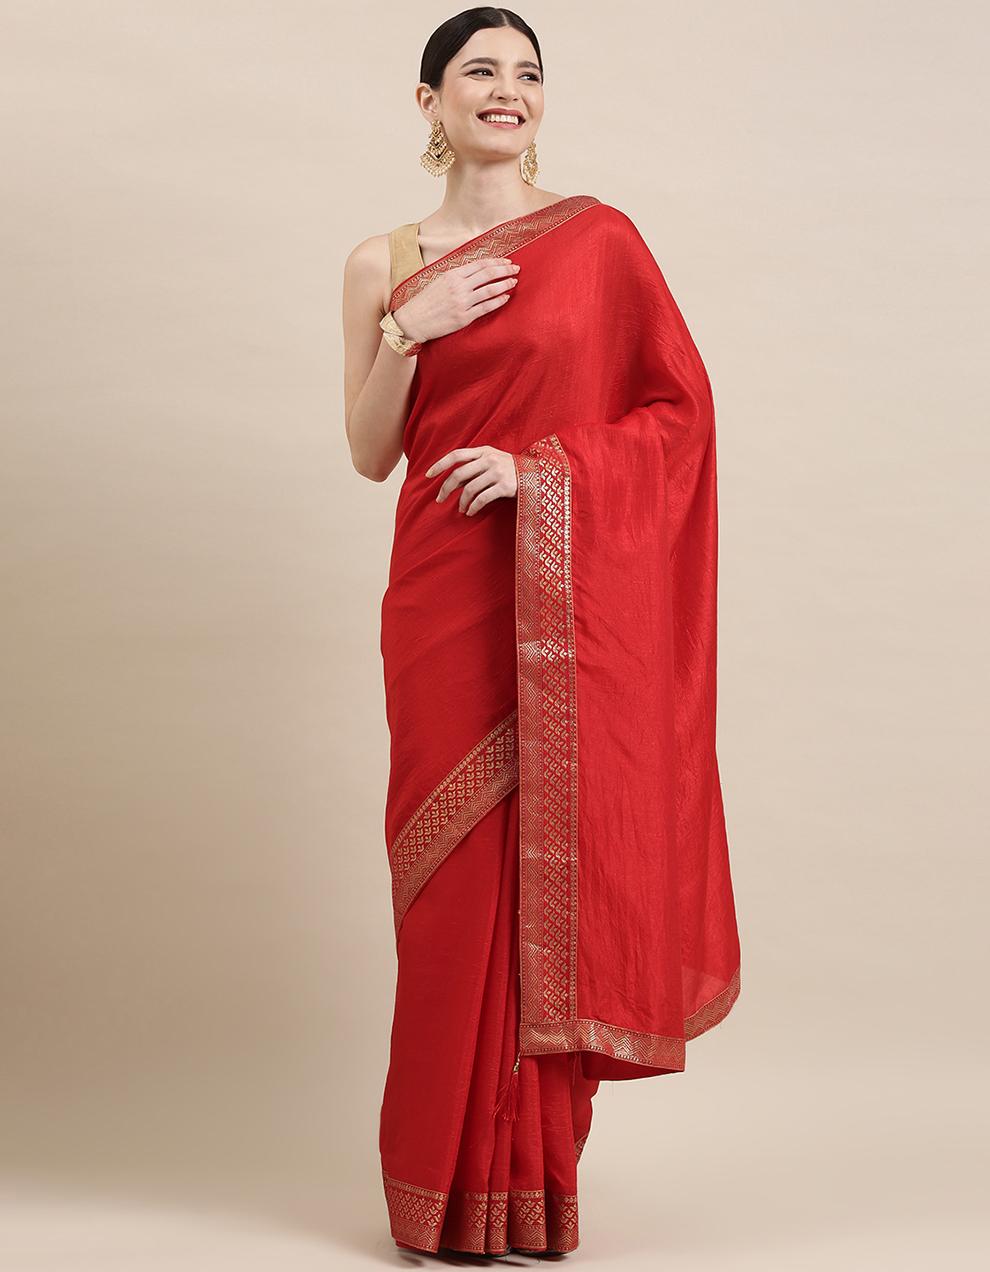 Red Vichitra Silk Saree With Blouse IW26543